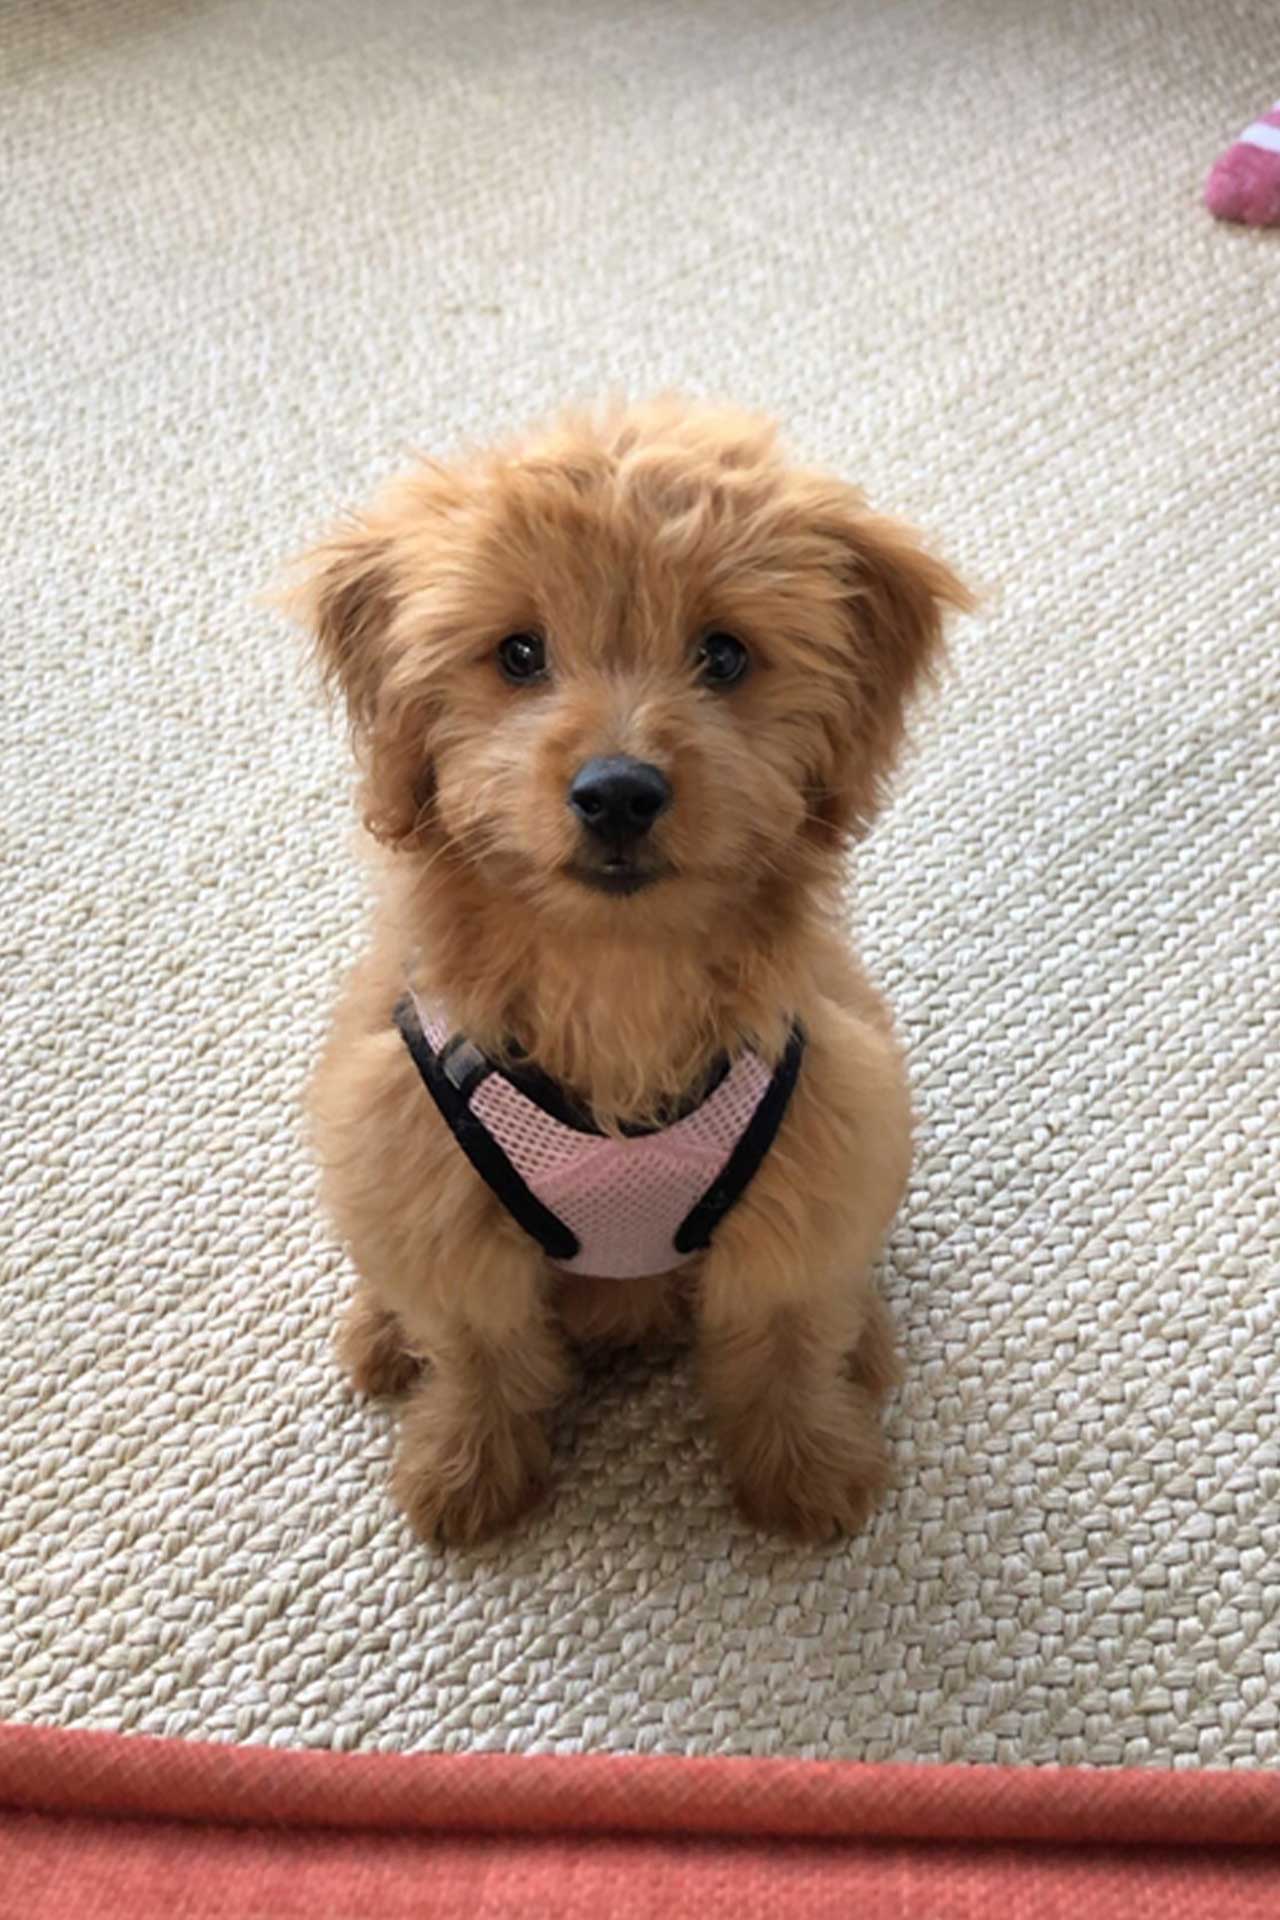 Mini Goldendoodle with playful stance